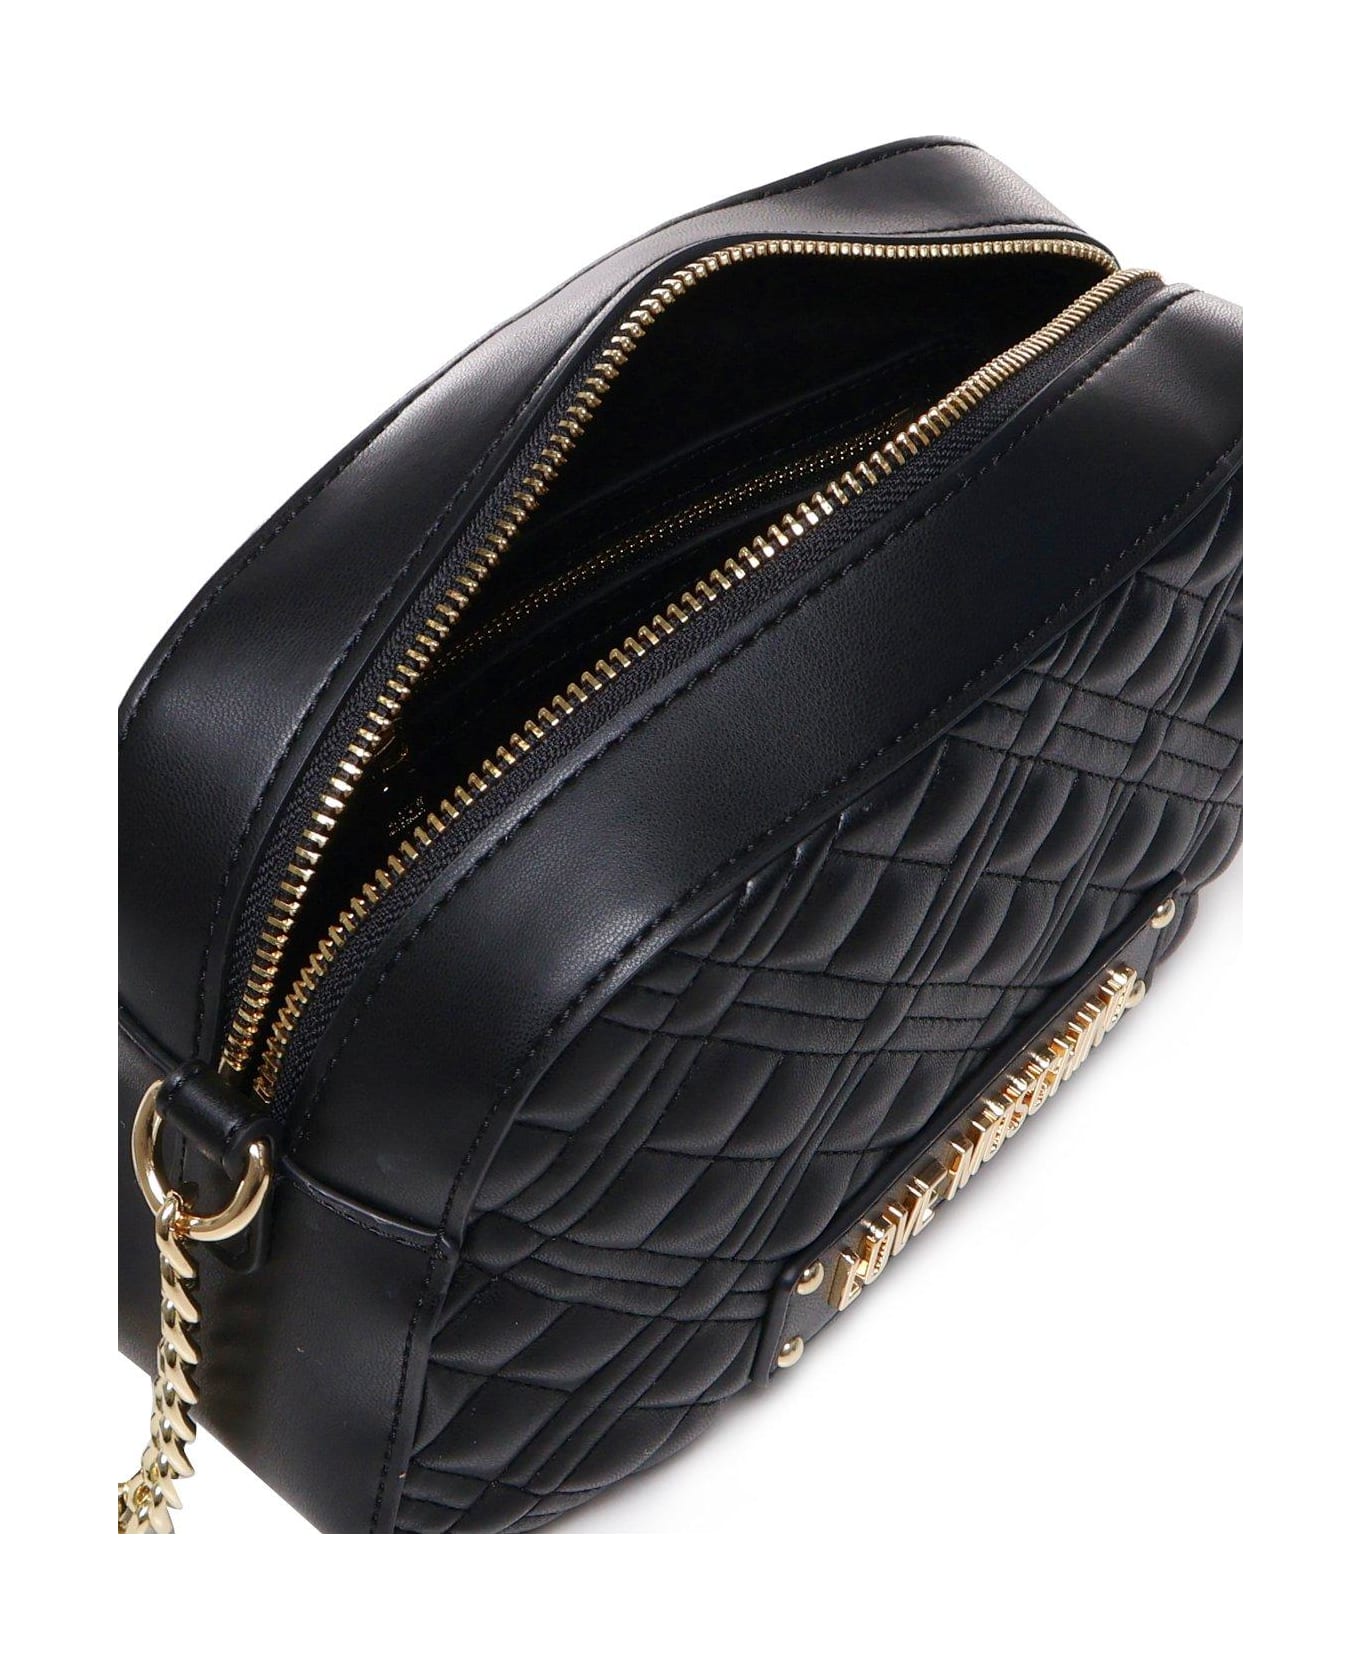 Love Moschino Logo Lettering Quilted Crossbody Bag - Nero ショルダーバッグ